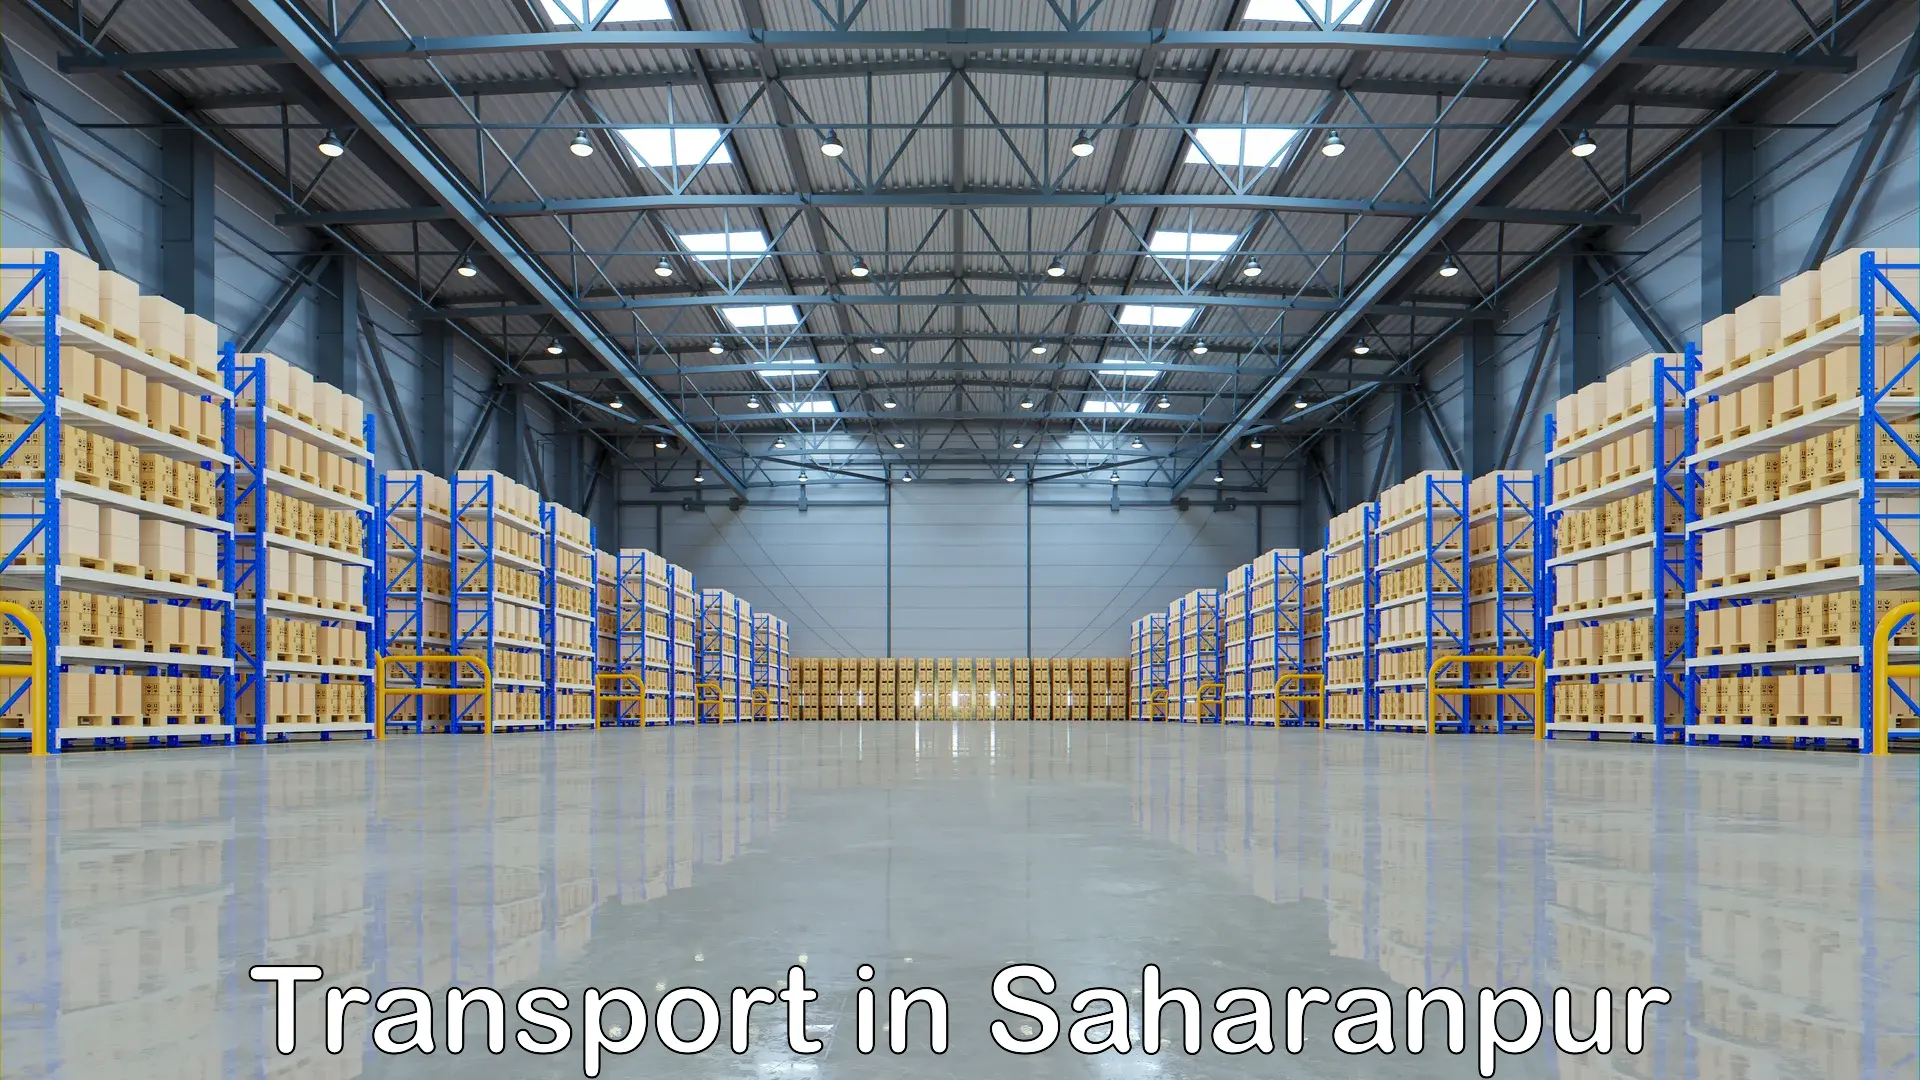 Transportation services in Saharanpur